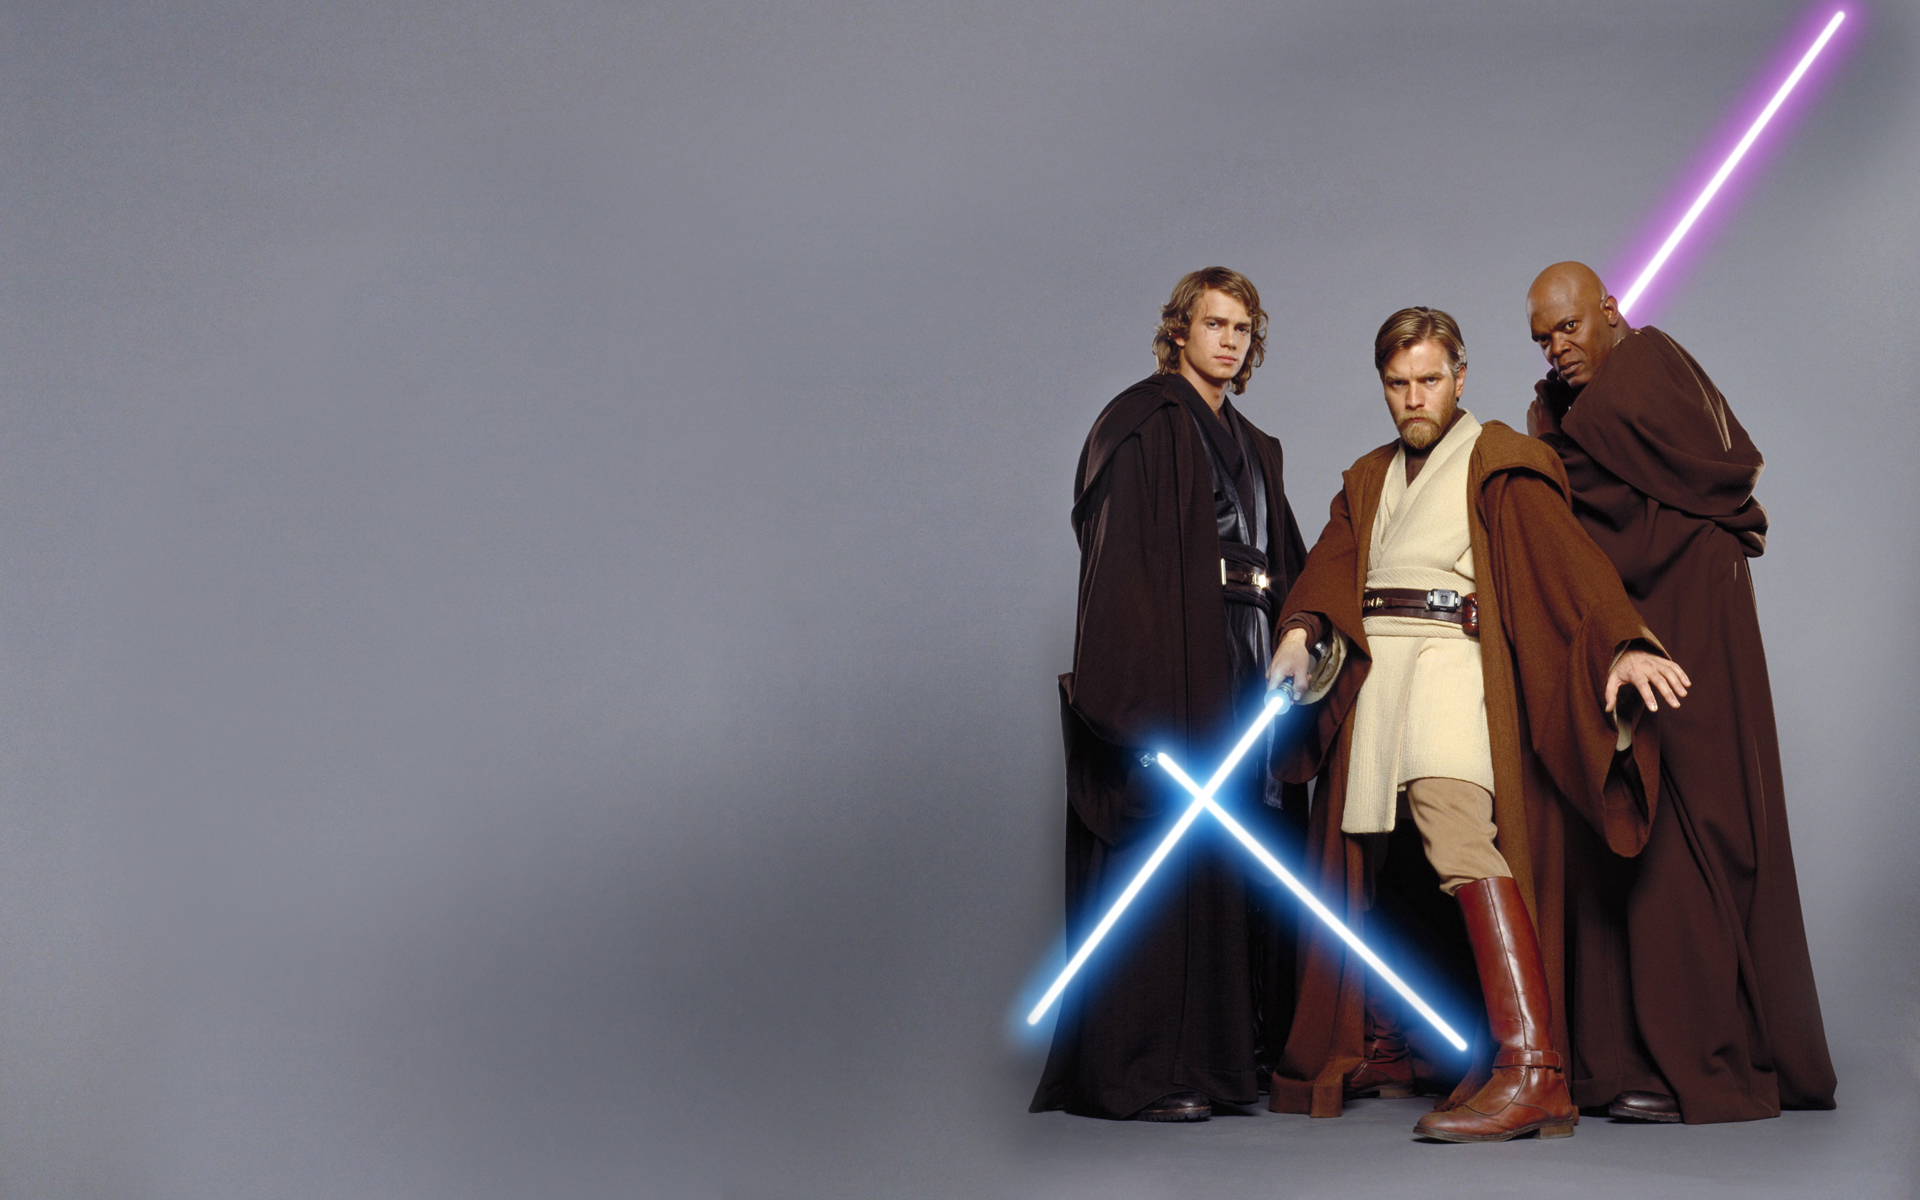 Movie Star Wars Episode III: Revenge of the Sith HD Wallpaper | Background Image